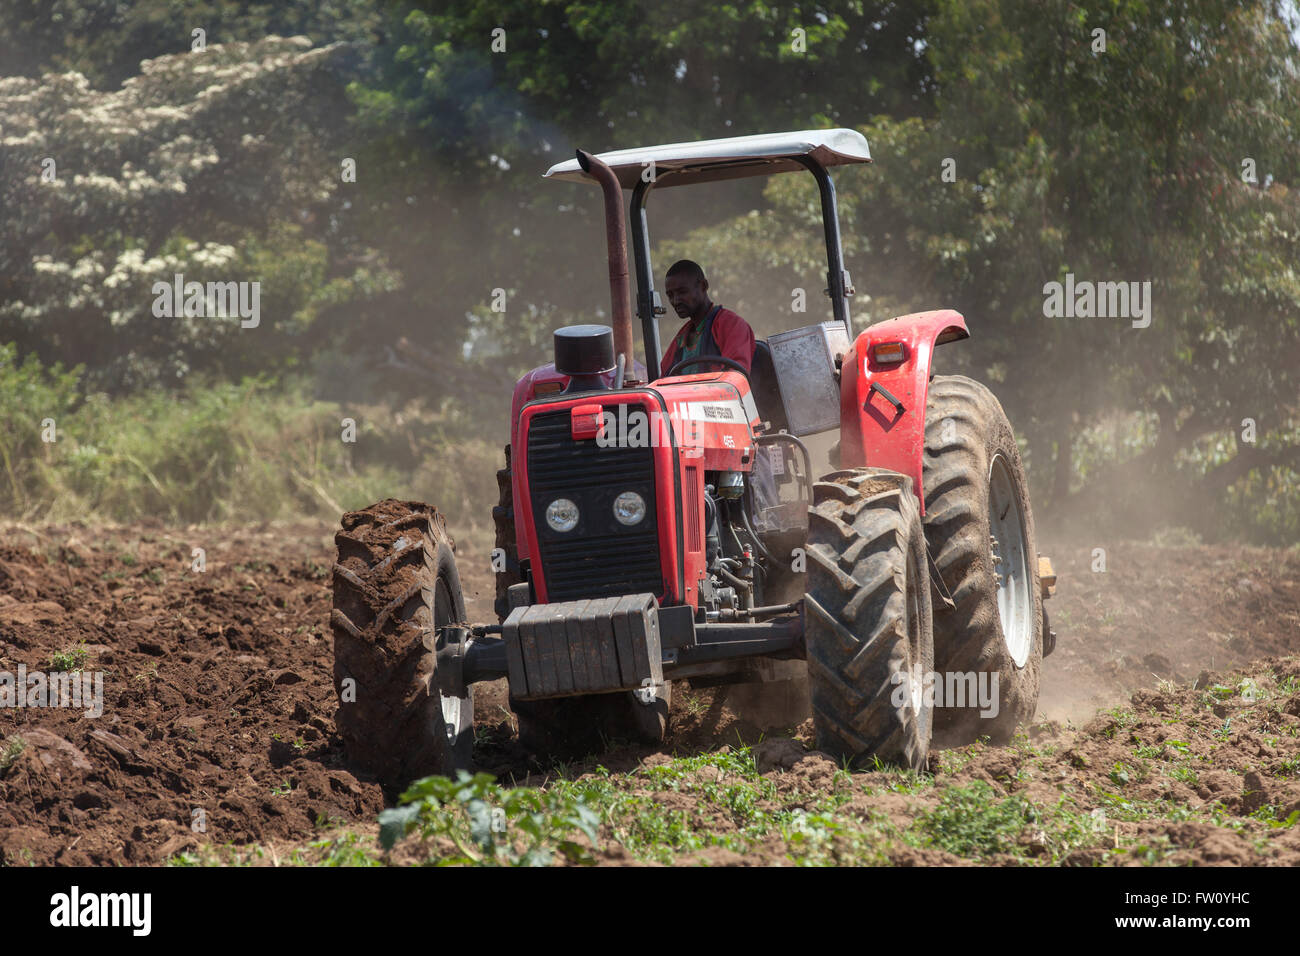 Meki River delta, Ziway, Ethiopia, October 2013: Using a tractor to plough the land. Stock Photo